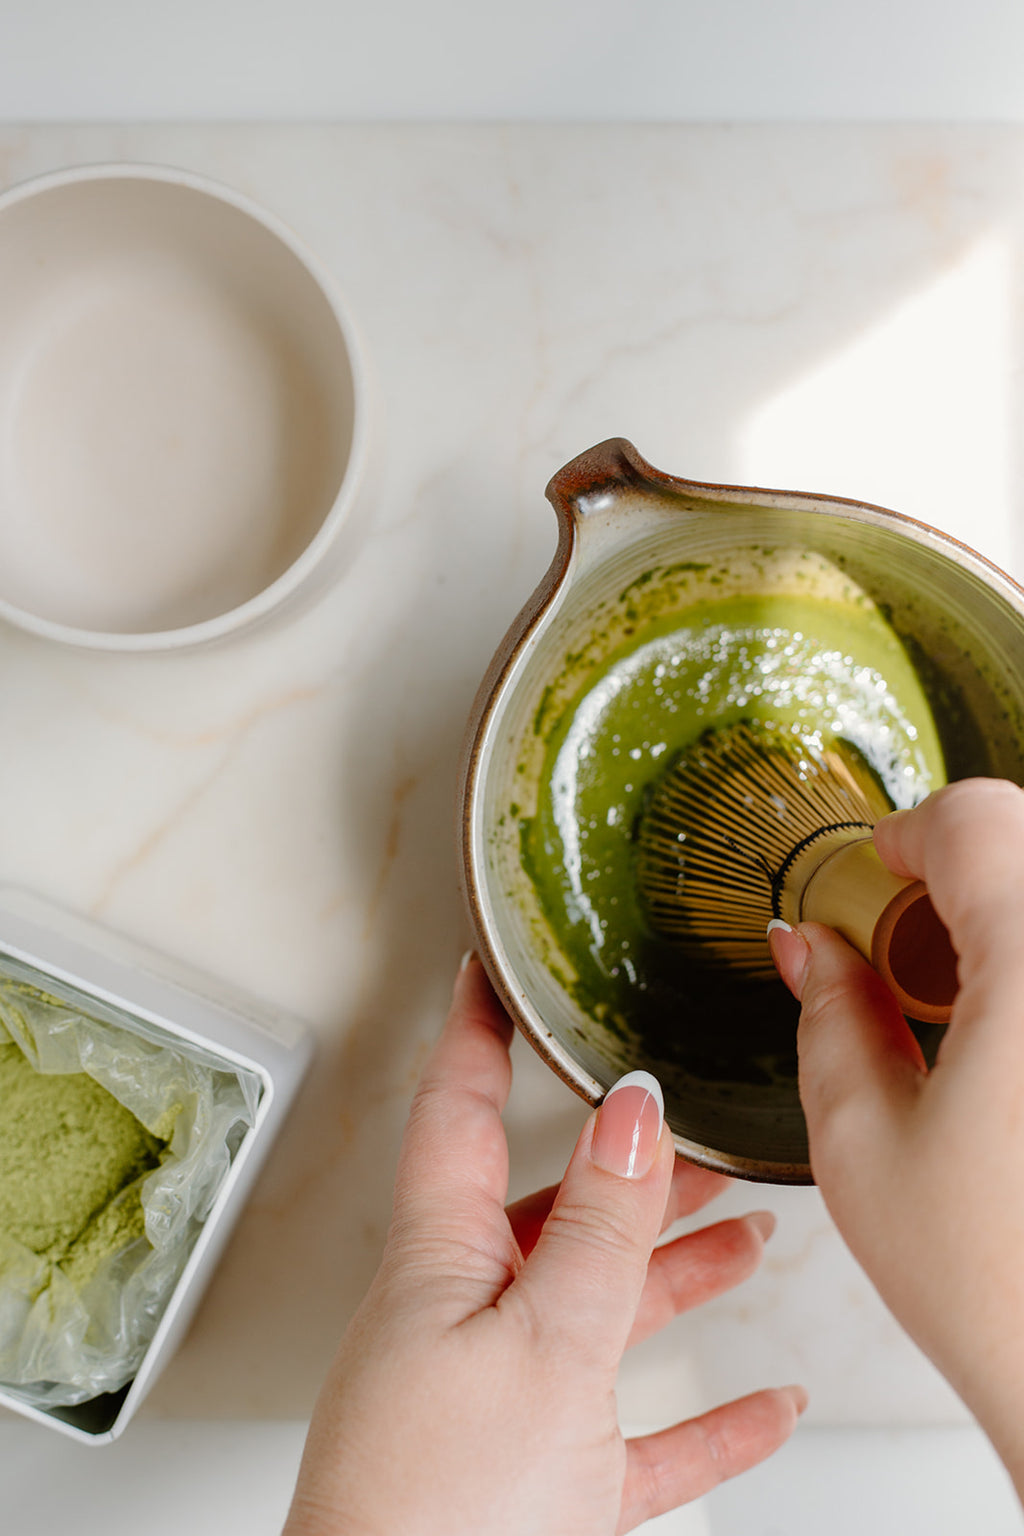 How to Whisk a Bowl of Matcha Green Tea